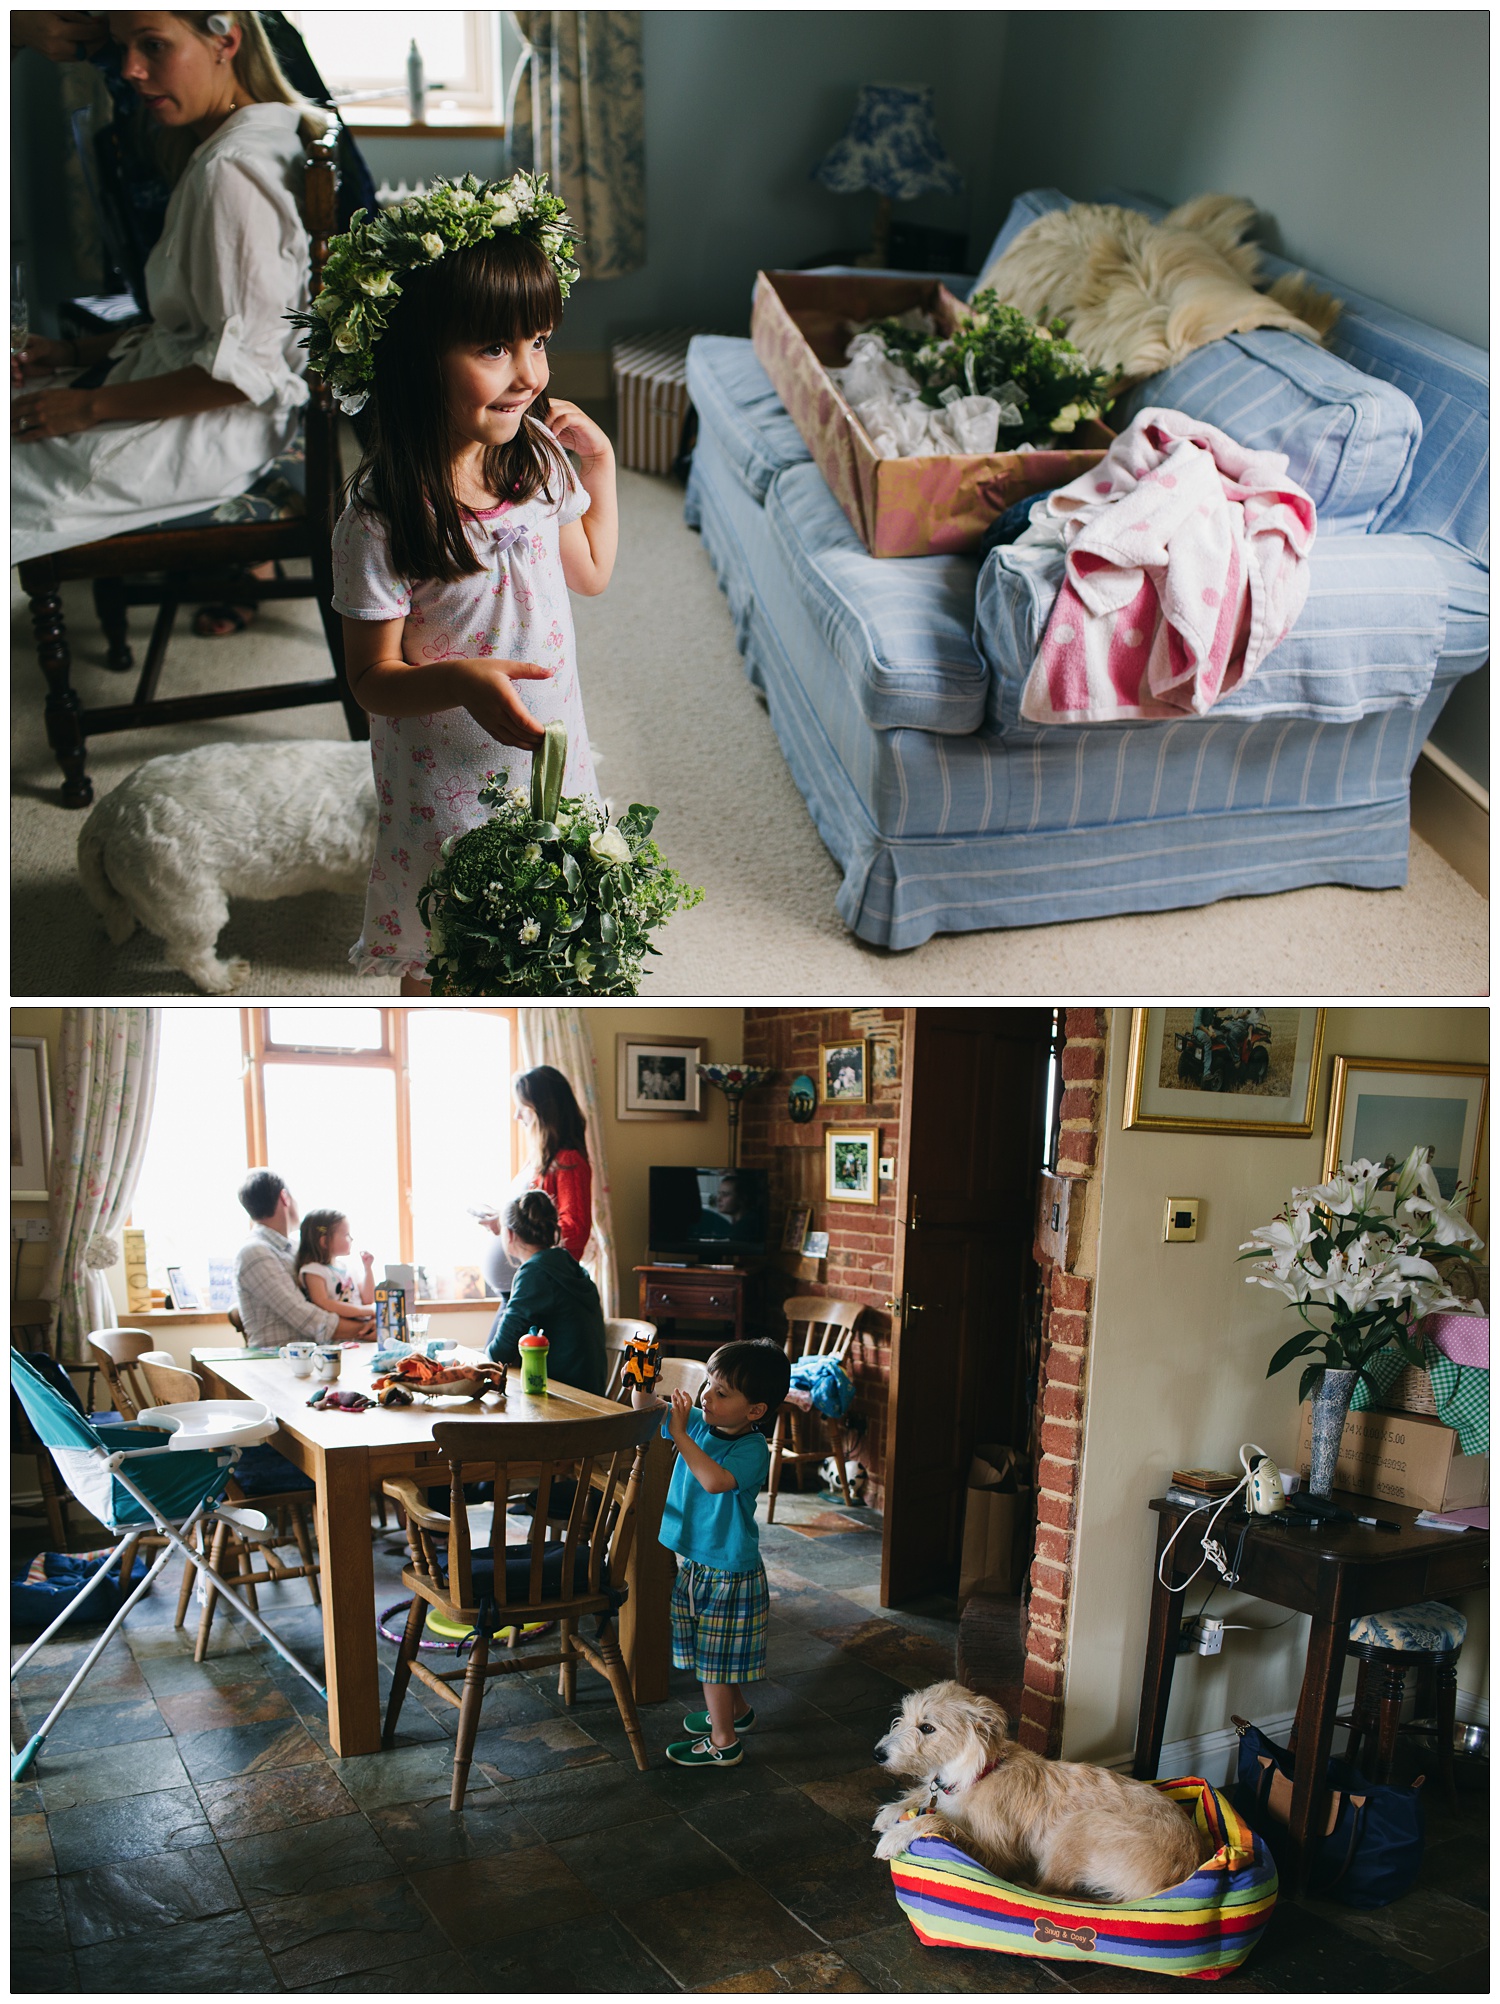 A flower girl wearing a crown and her nightdress. Scenes from a kitchen on a wedding morning. A dog is in a basket.